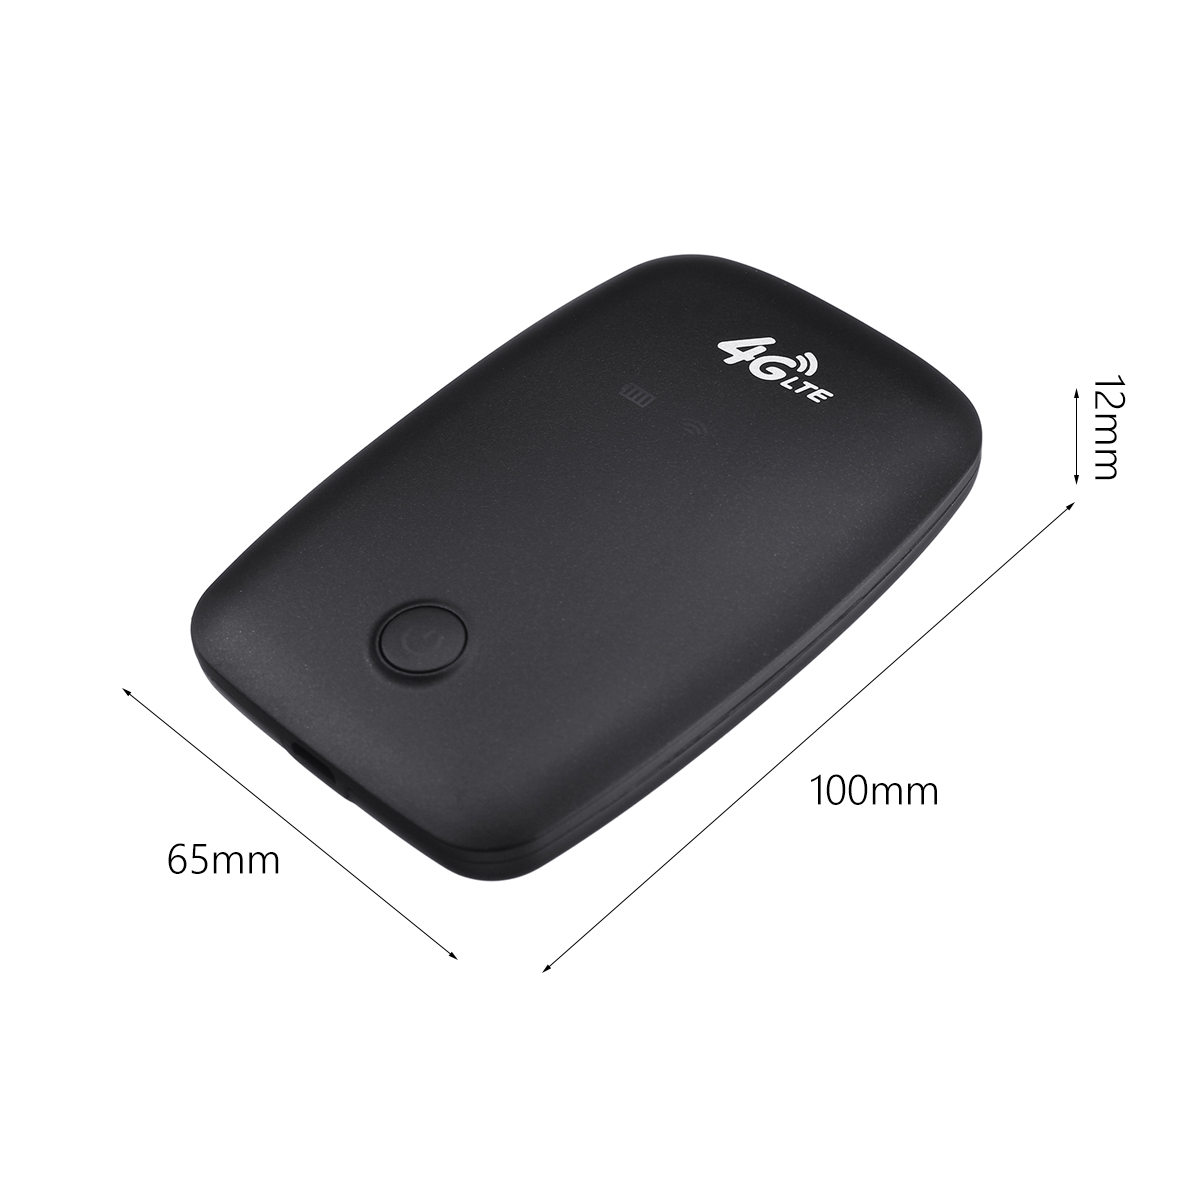 3Mode 4G 3G 2G WiFi Wireless Portable Pocket Router Support 32G TF Card Suitable for PC Mobile 37